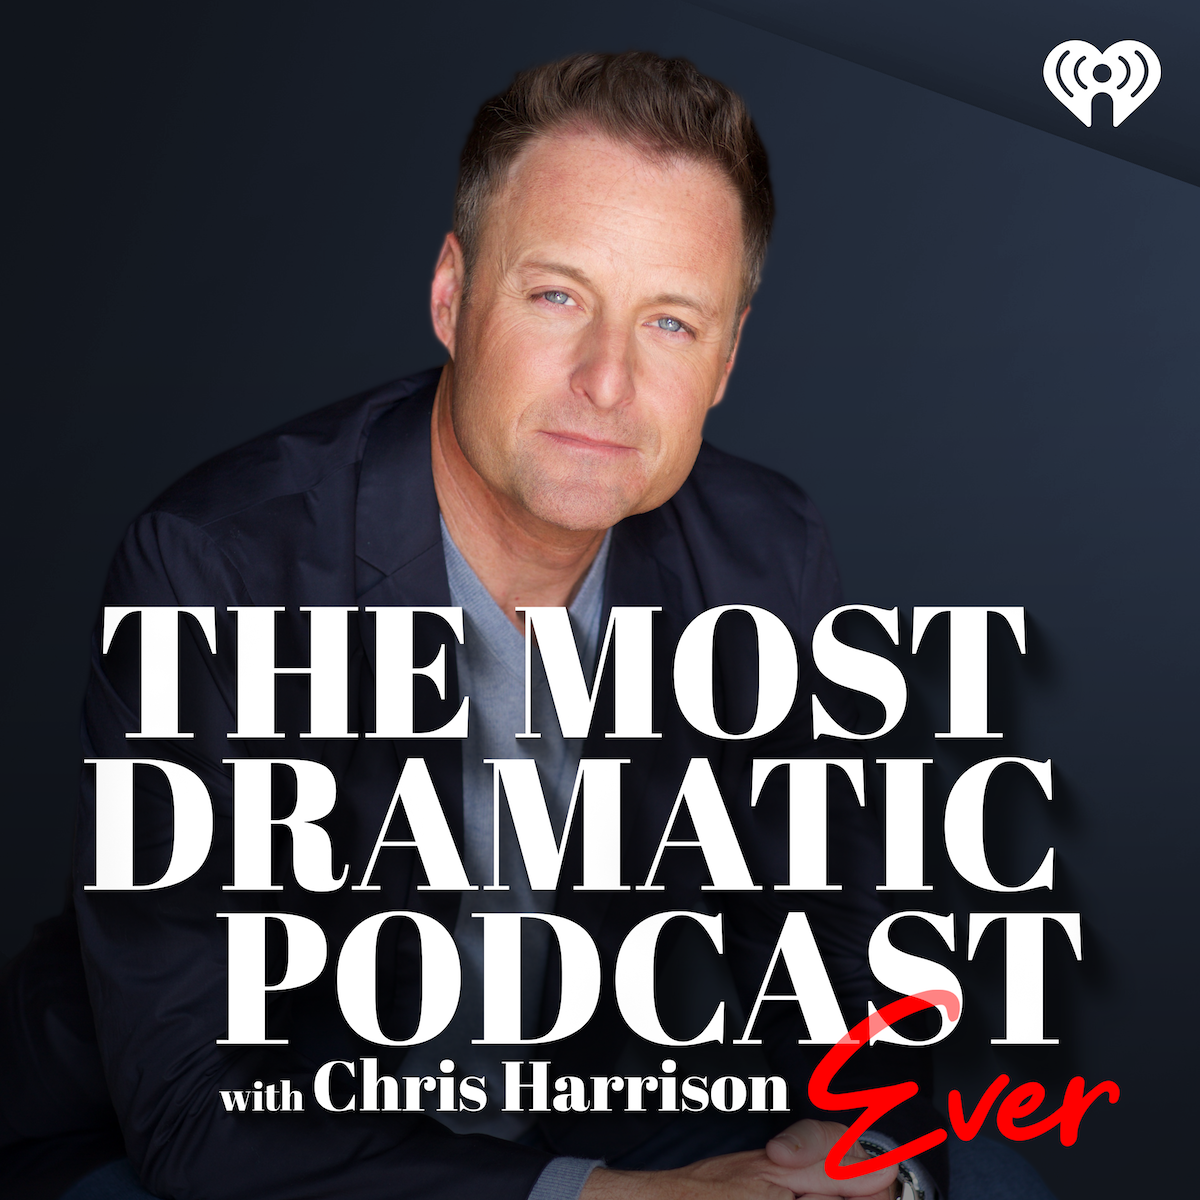 Chris Harrison in a promo image for his new podcast 'The Most Dramatic Podcast Ever'